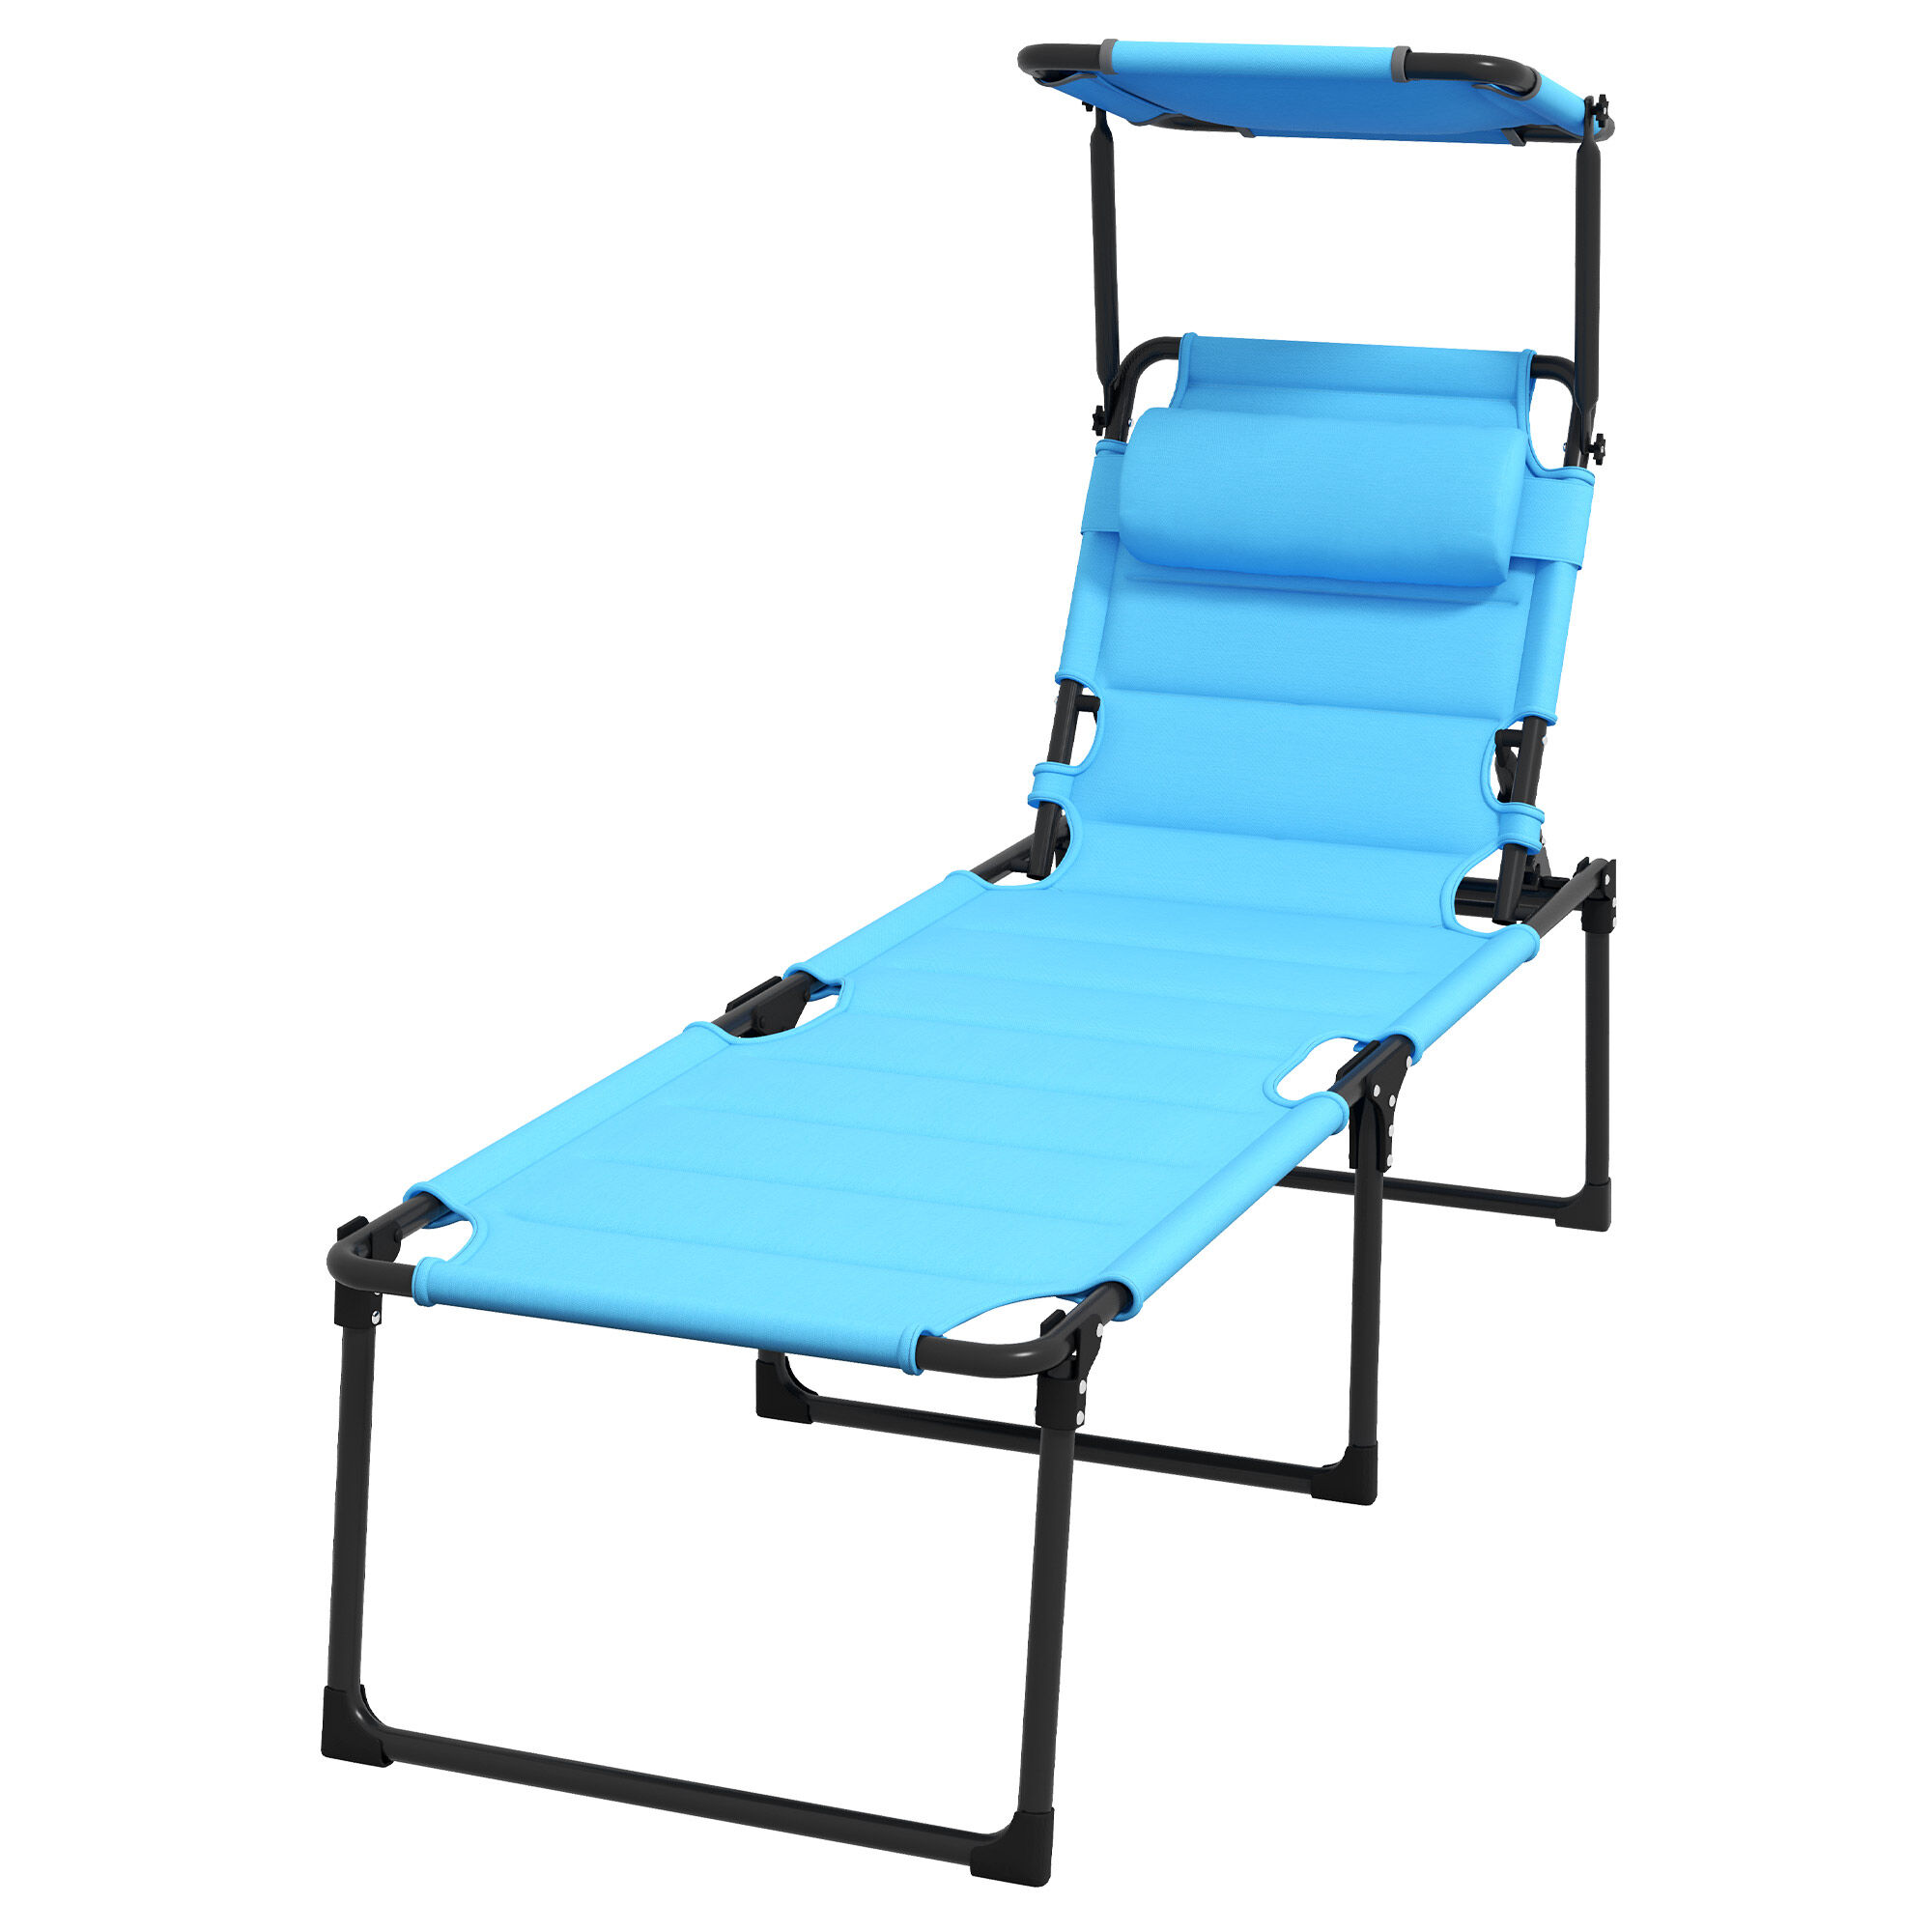 Outsunny Adjustable Folding Chaise Lounge with 4-position Backrest, Sun Roof, Head Pillow for Patio, Balcony, Outdoor, Light Blue